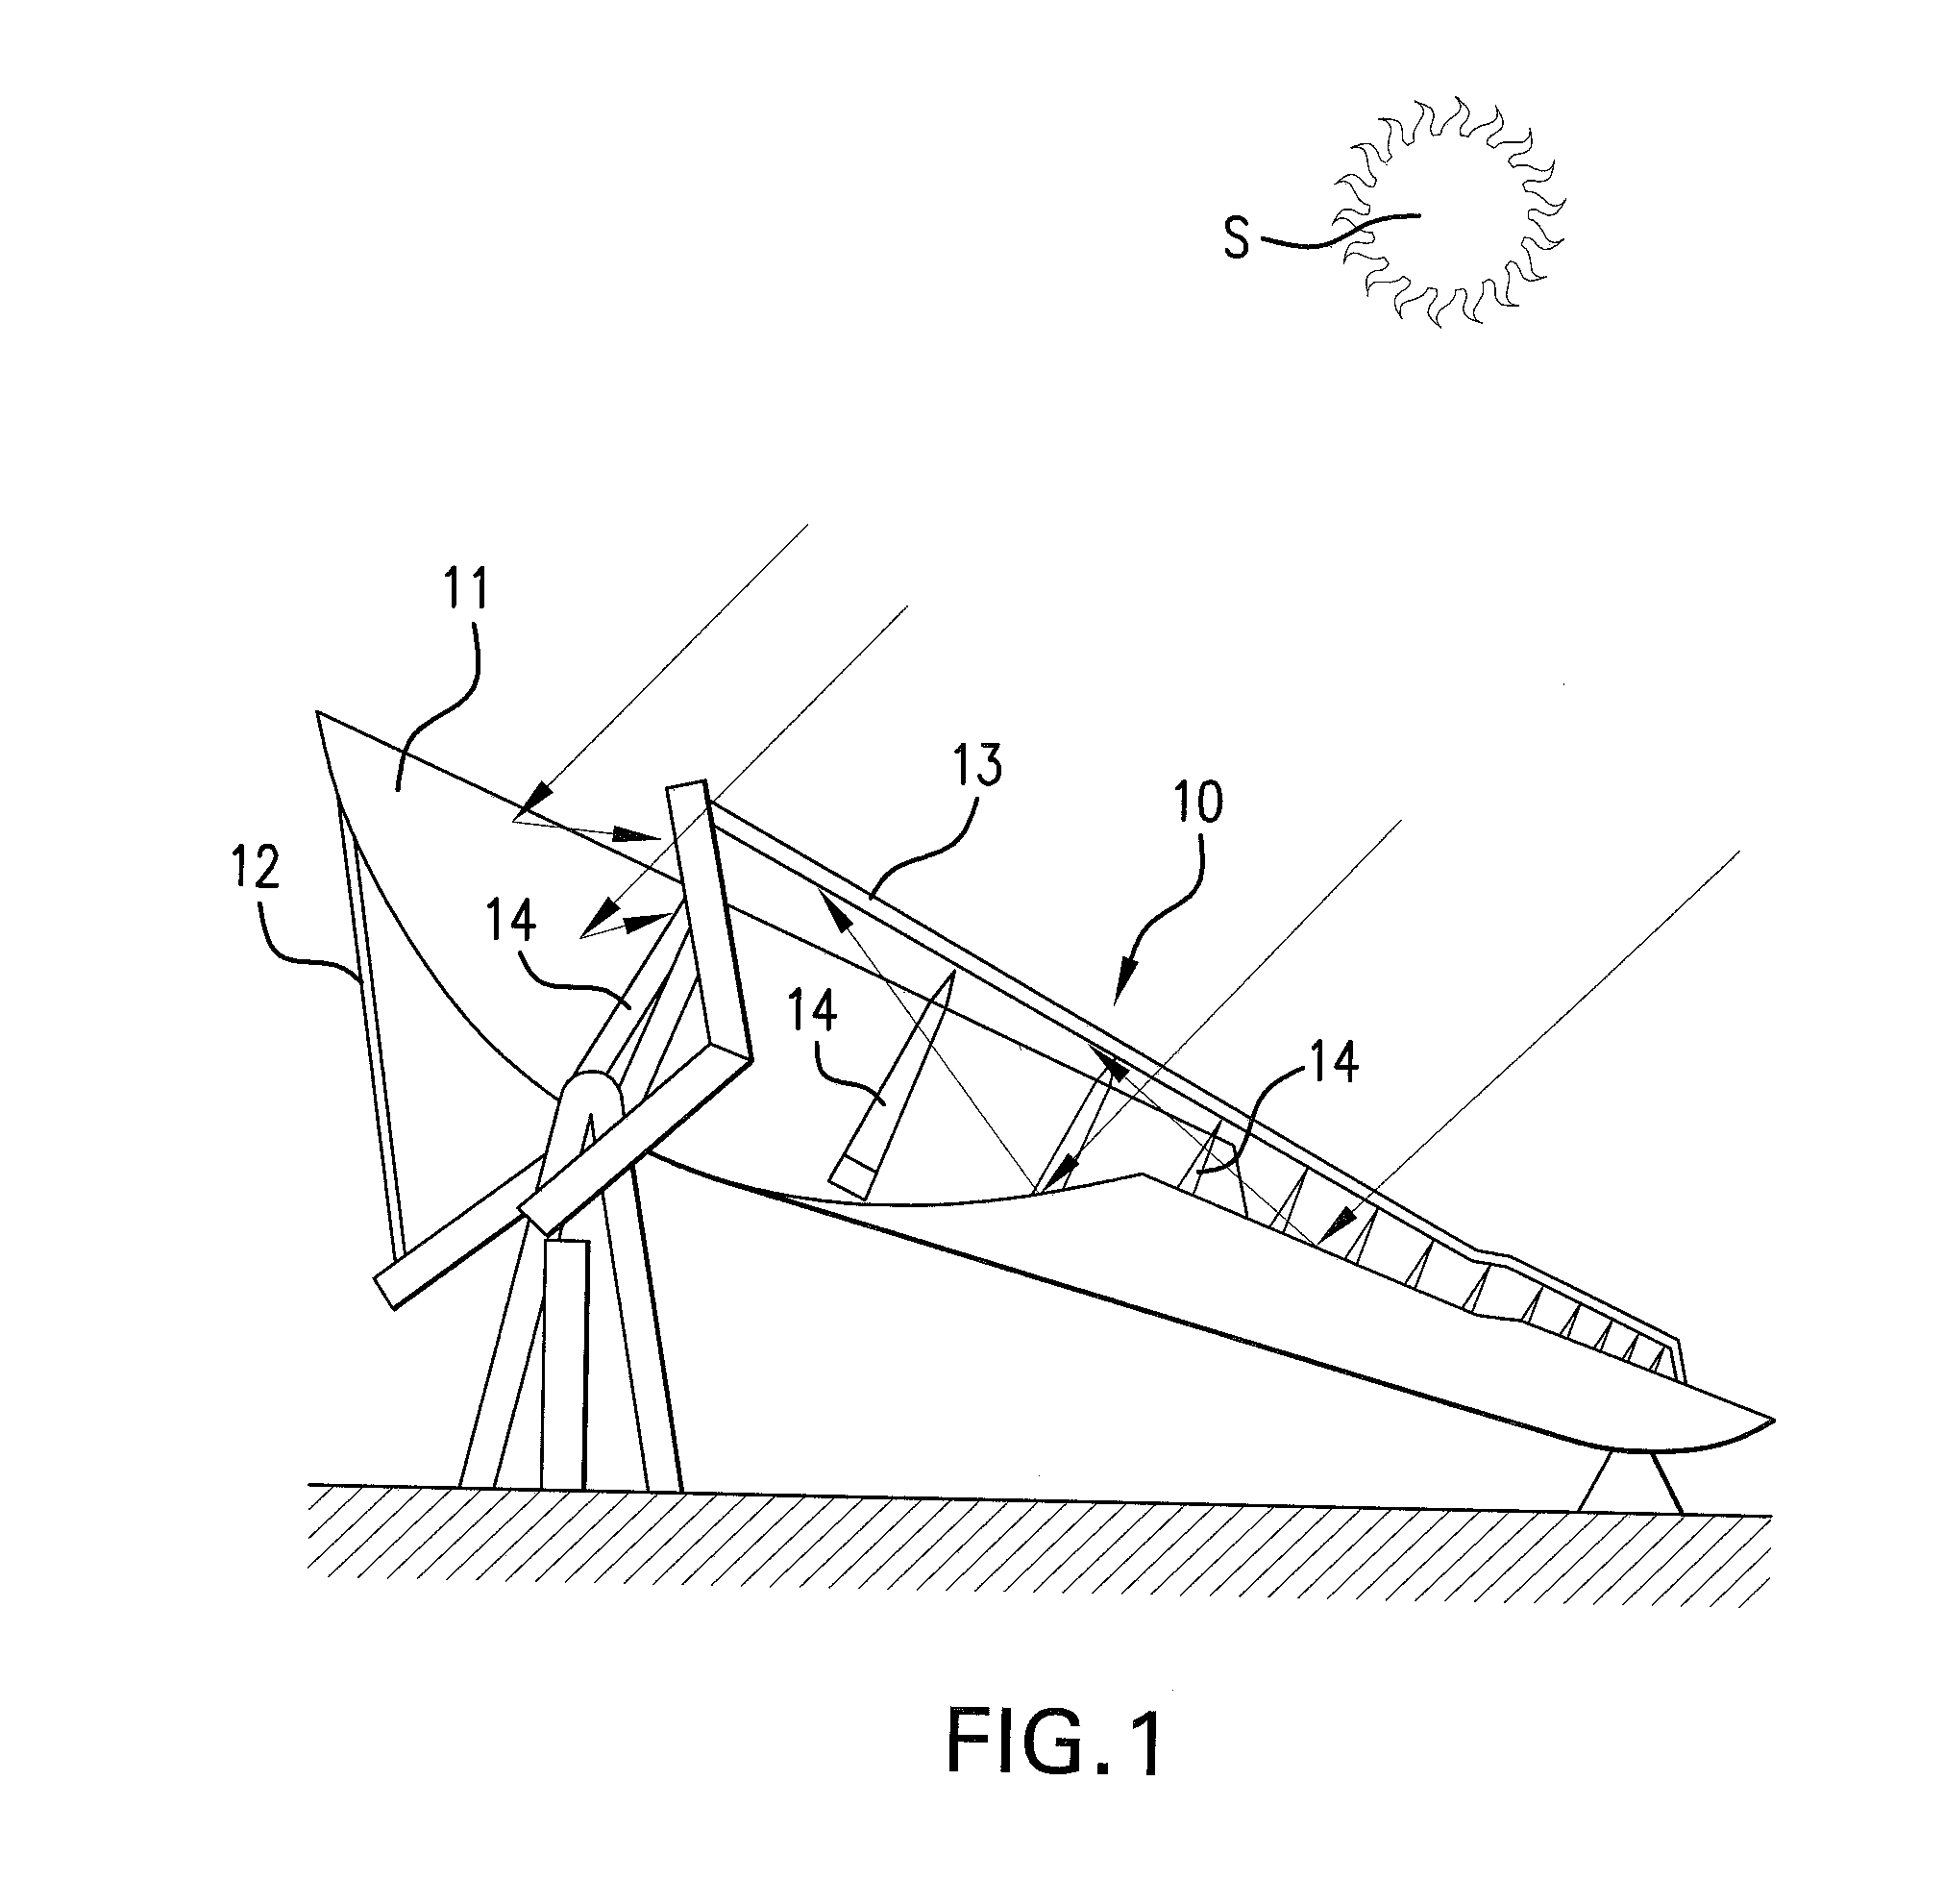 Radiation selective absorber coating for an absorber pipe, absorber pipe with said coating, and method of making same